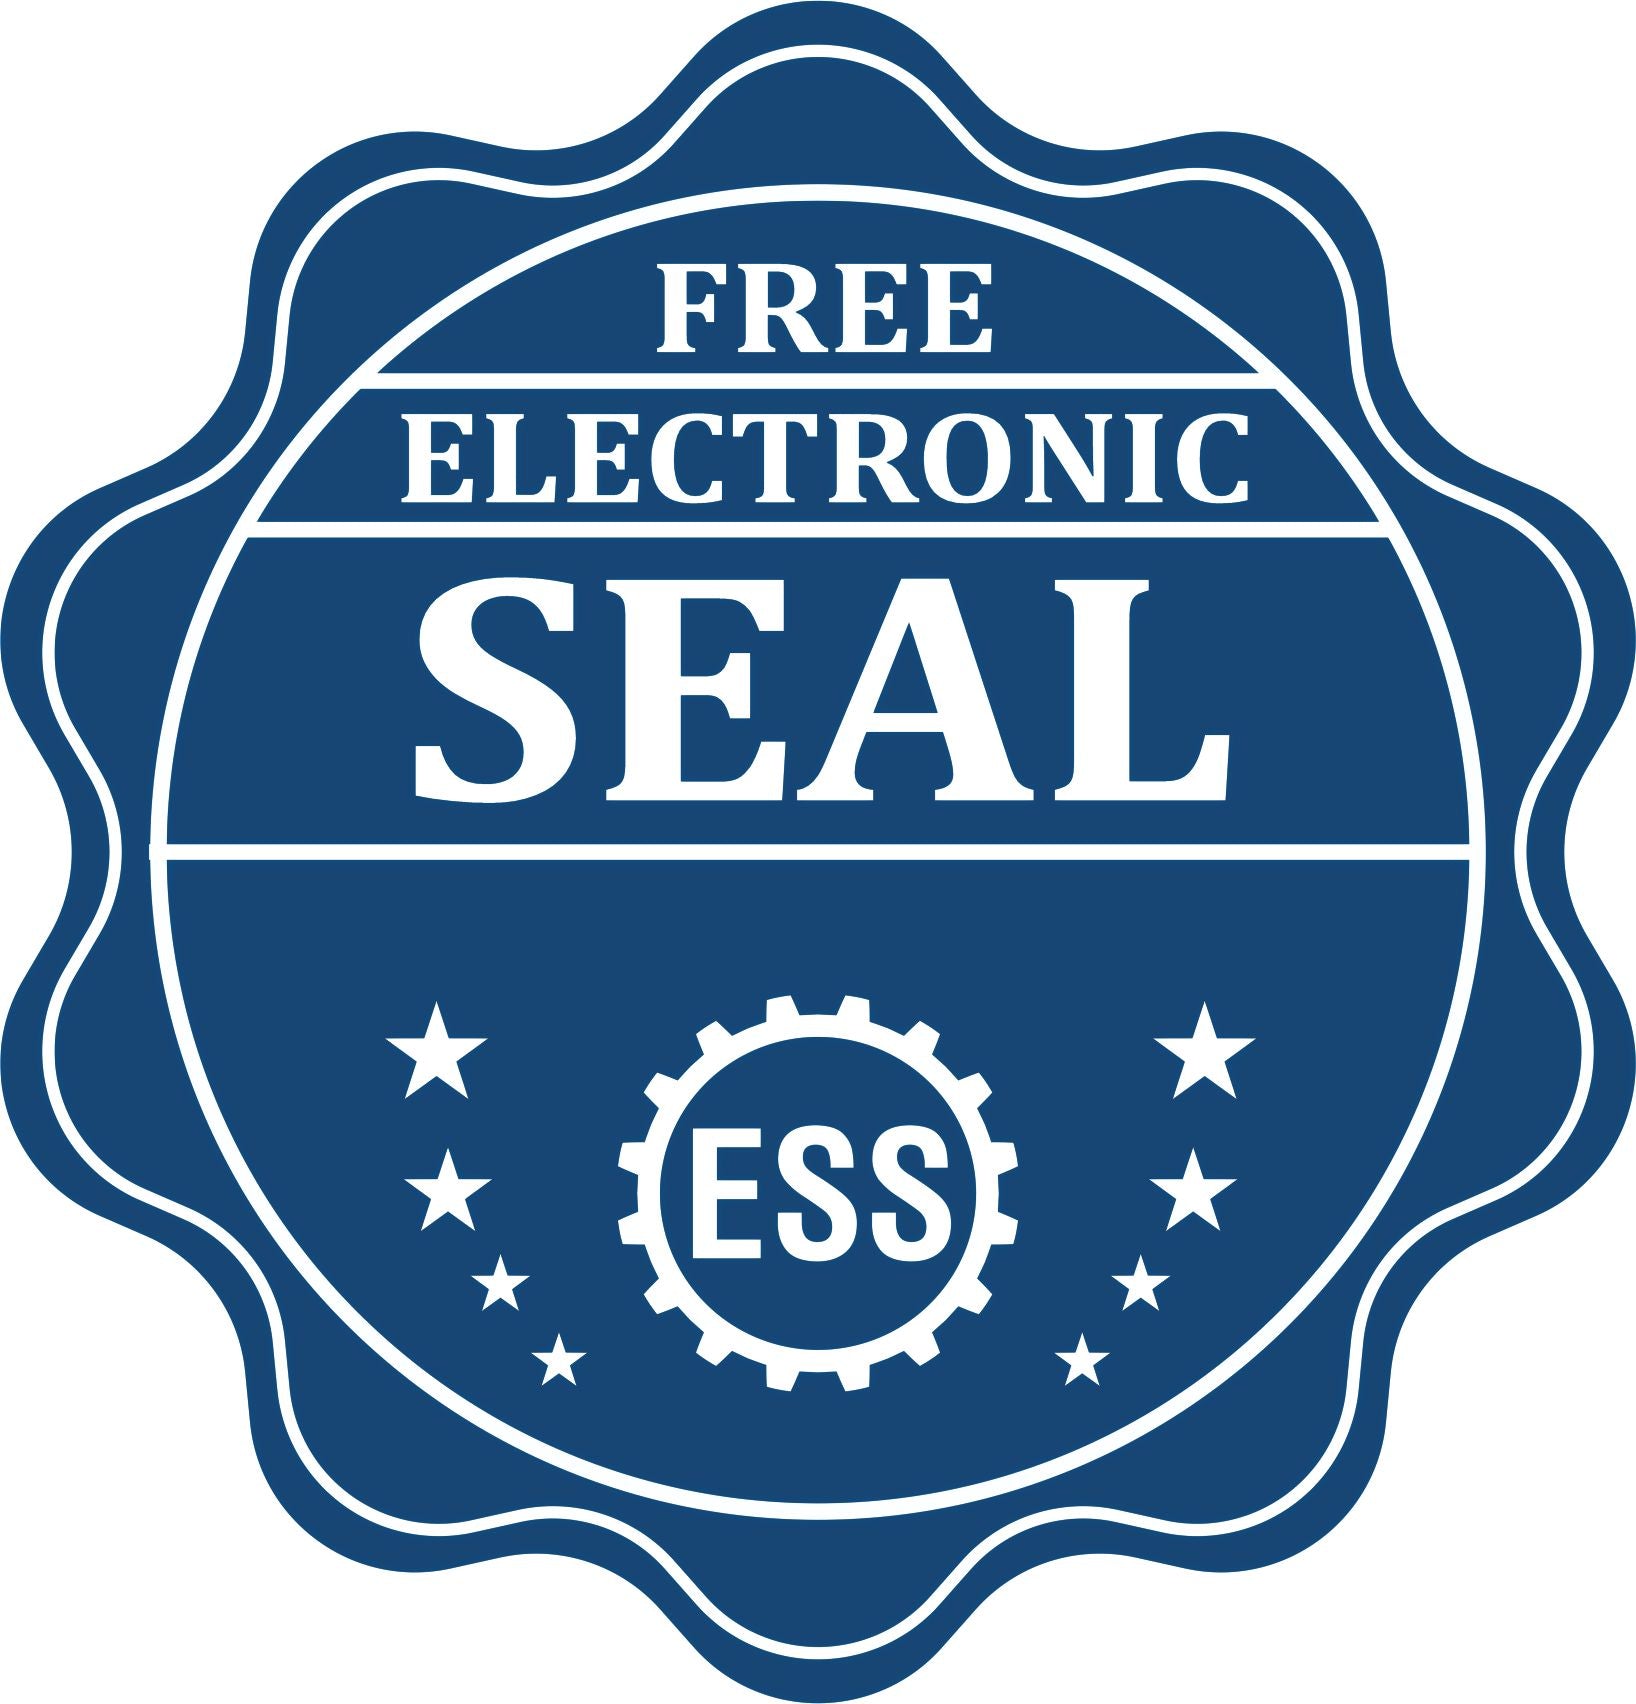 A badge showing a free electronic seal for the Handheld Mississippi Architect Seal Embosser with stars and the ESS gear on the emblem.